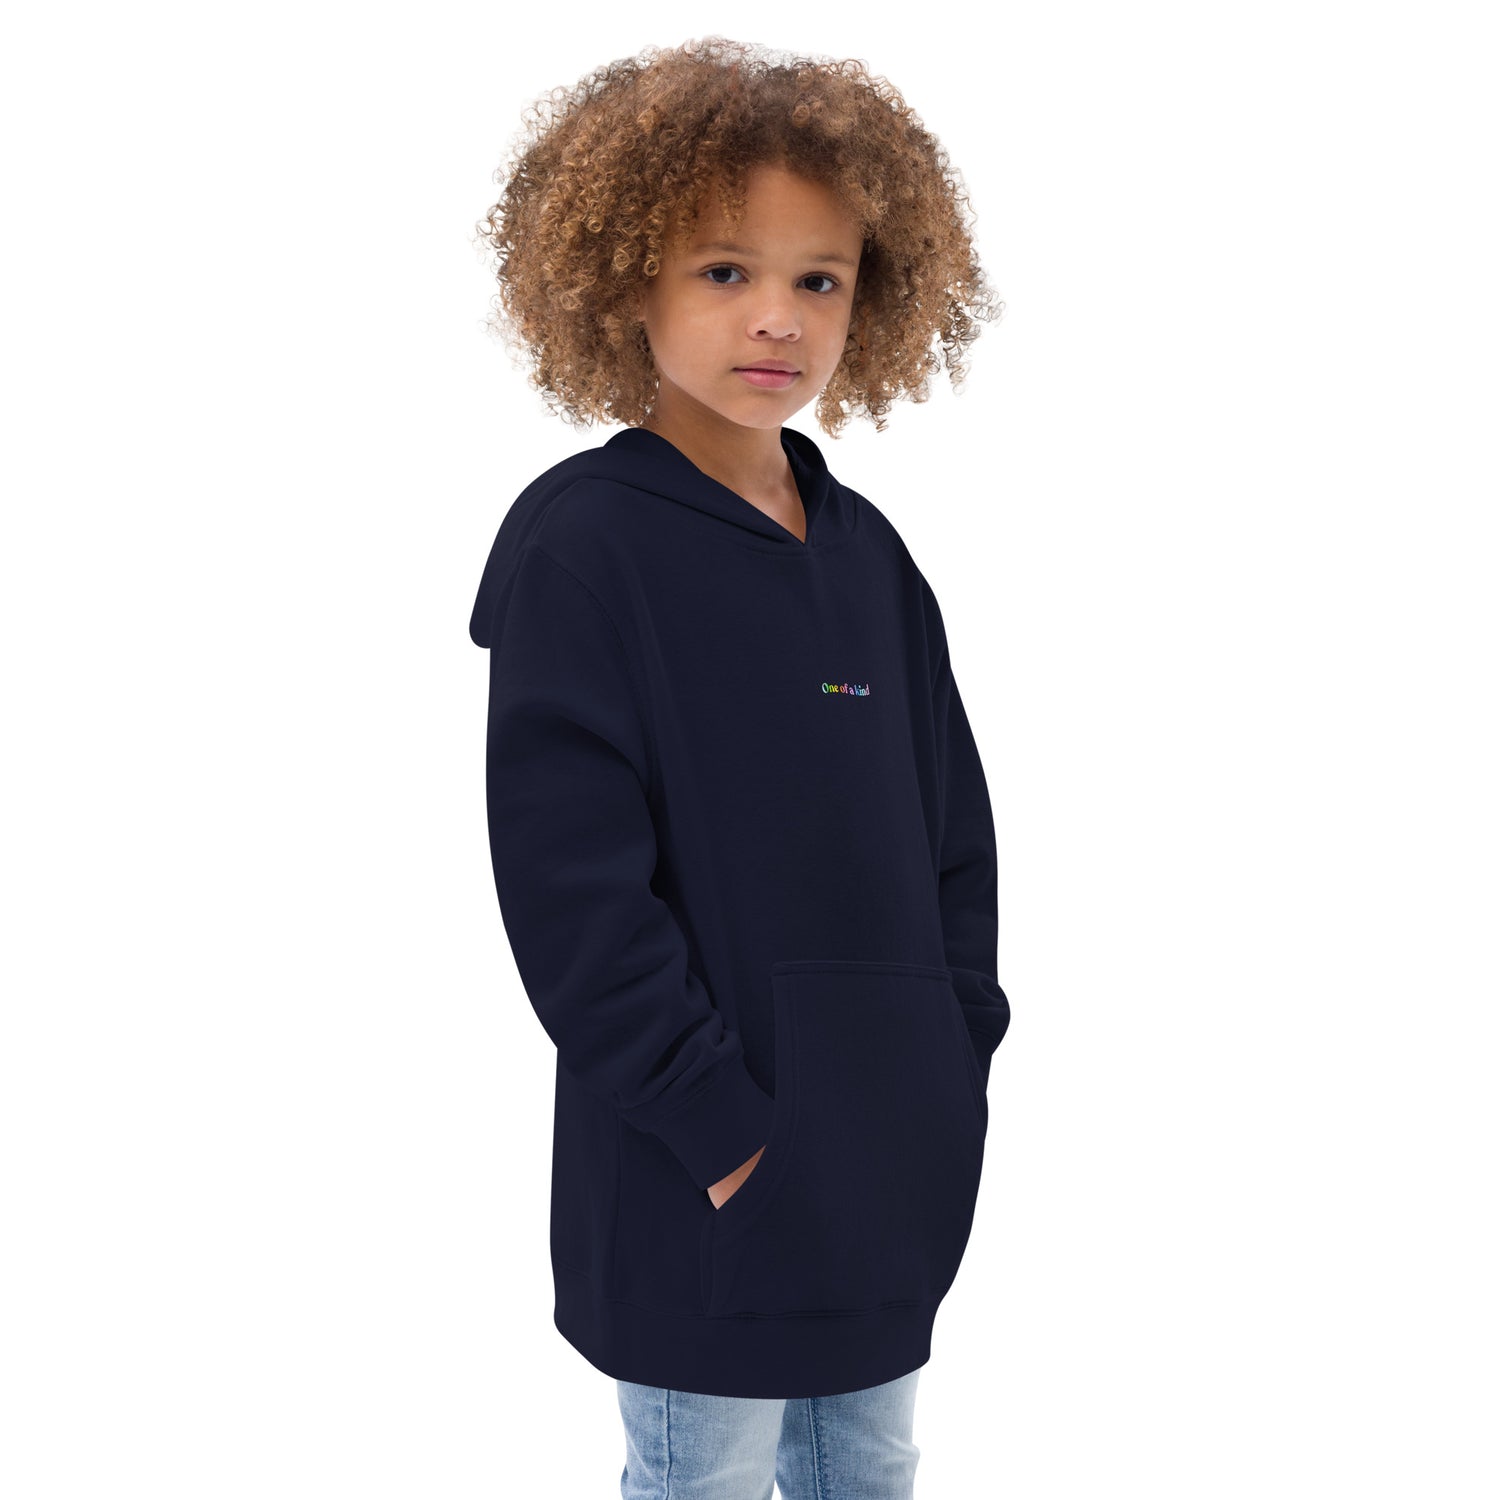 Right-front of Indigo kidswear hoodie with pockets, featuring " One of a kind" design